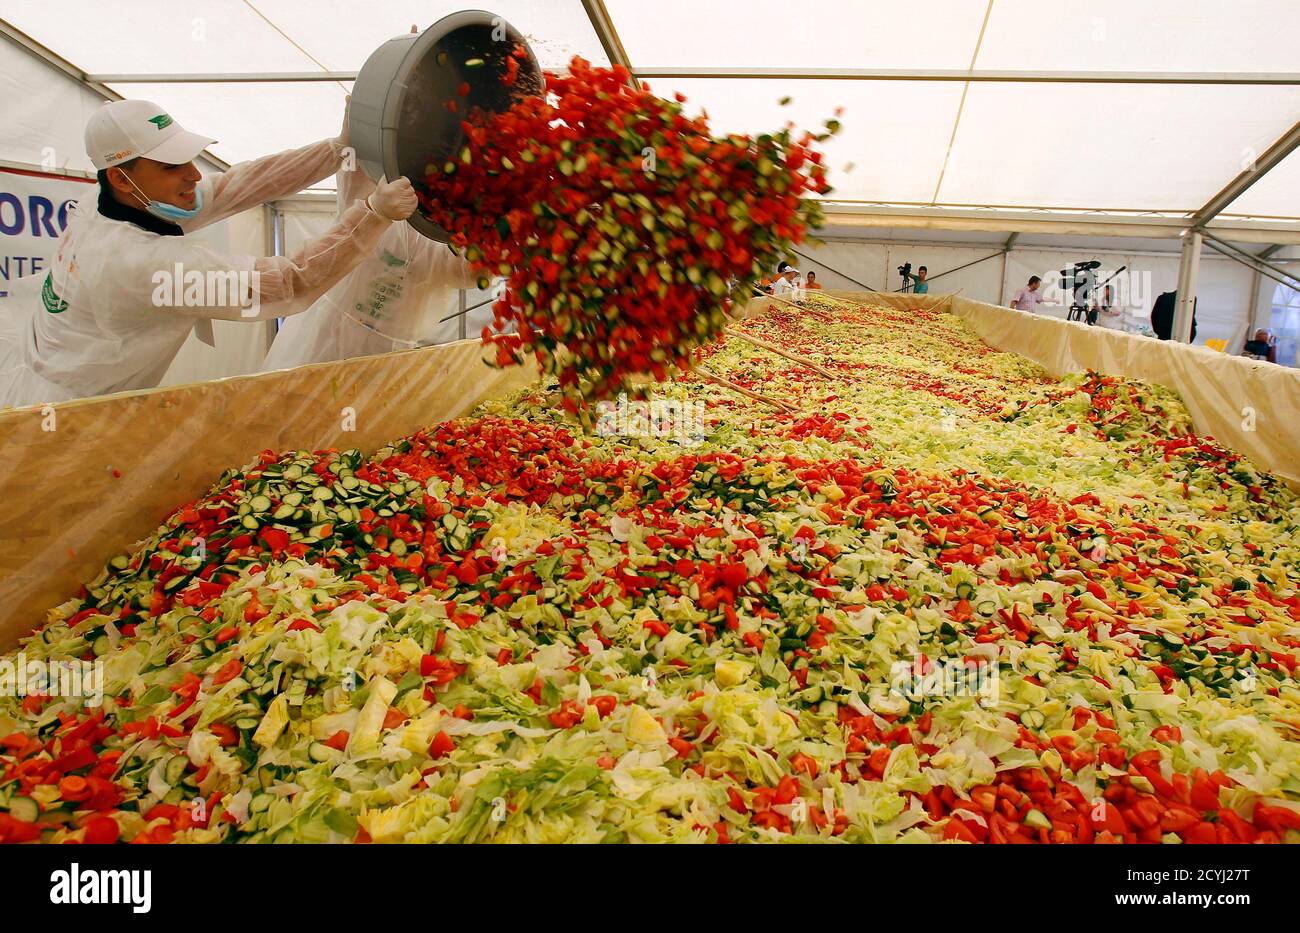 Volunteers Add Vegetables To Create The World S Biggest Vegetable Salad During A Guinness World Record Attempt